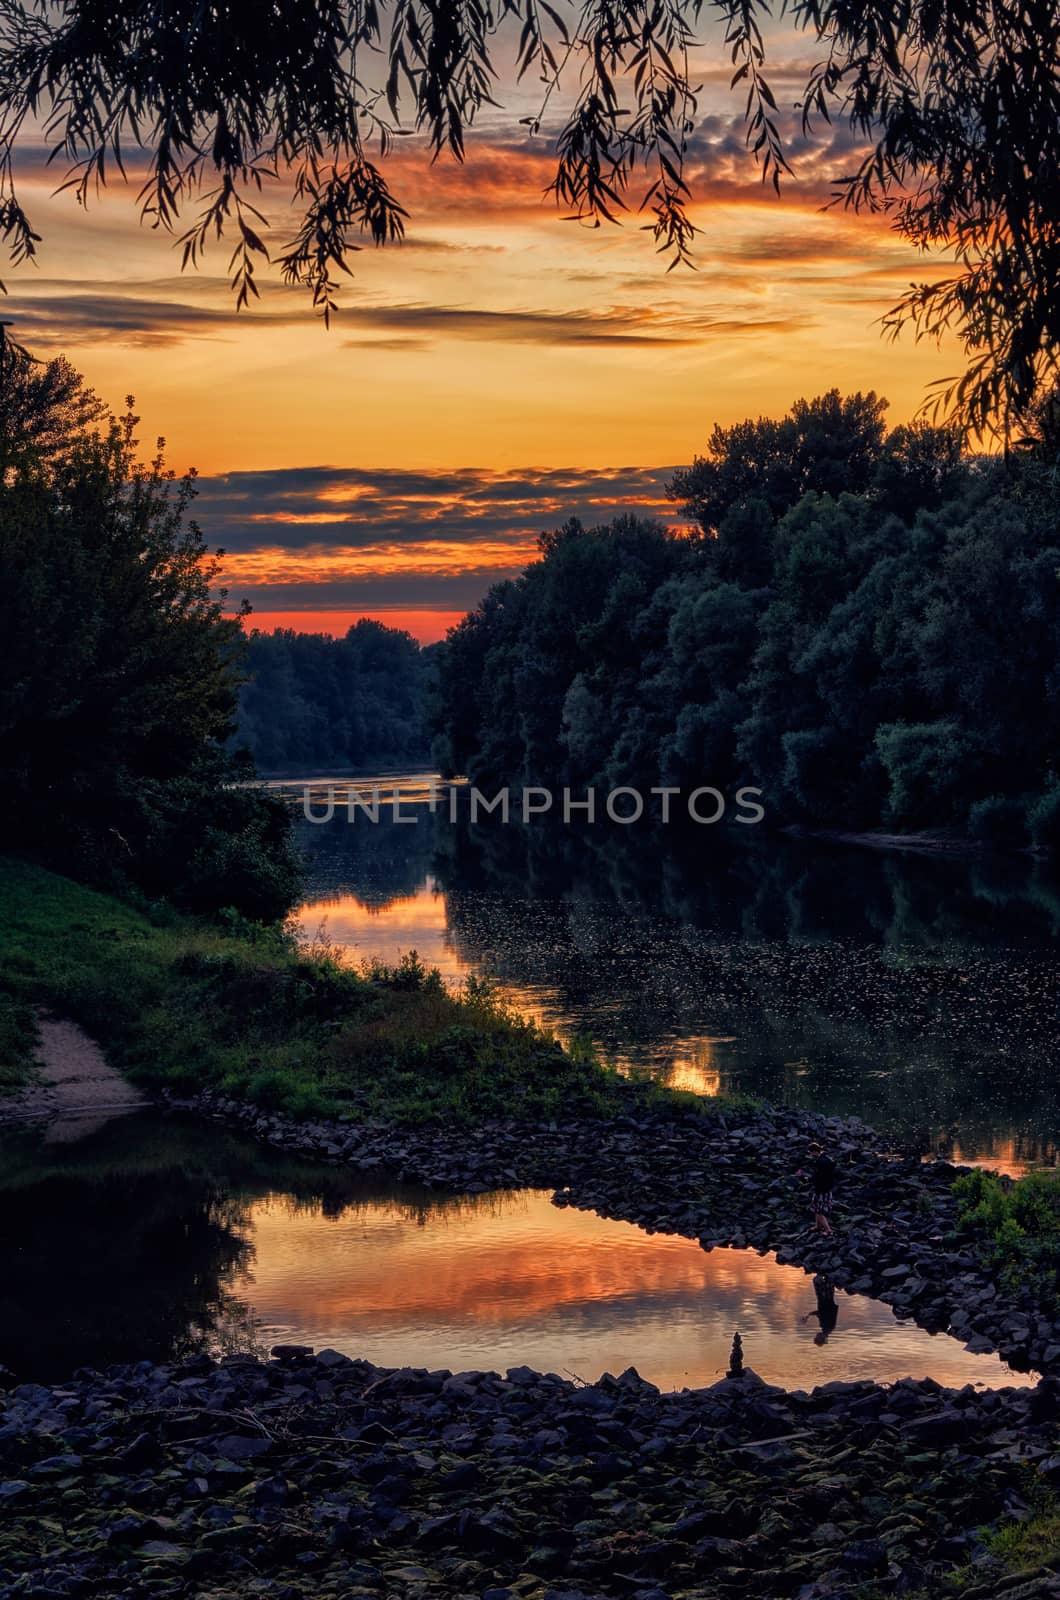 River at sunset with reflection by fmattte